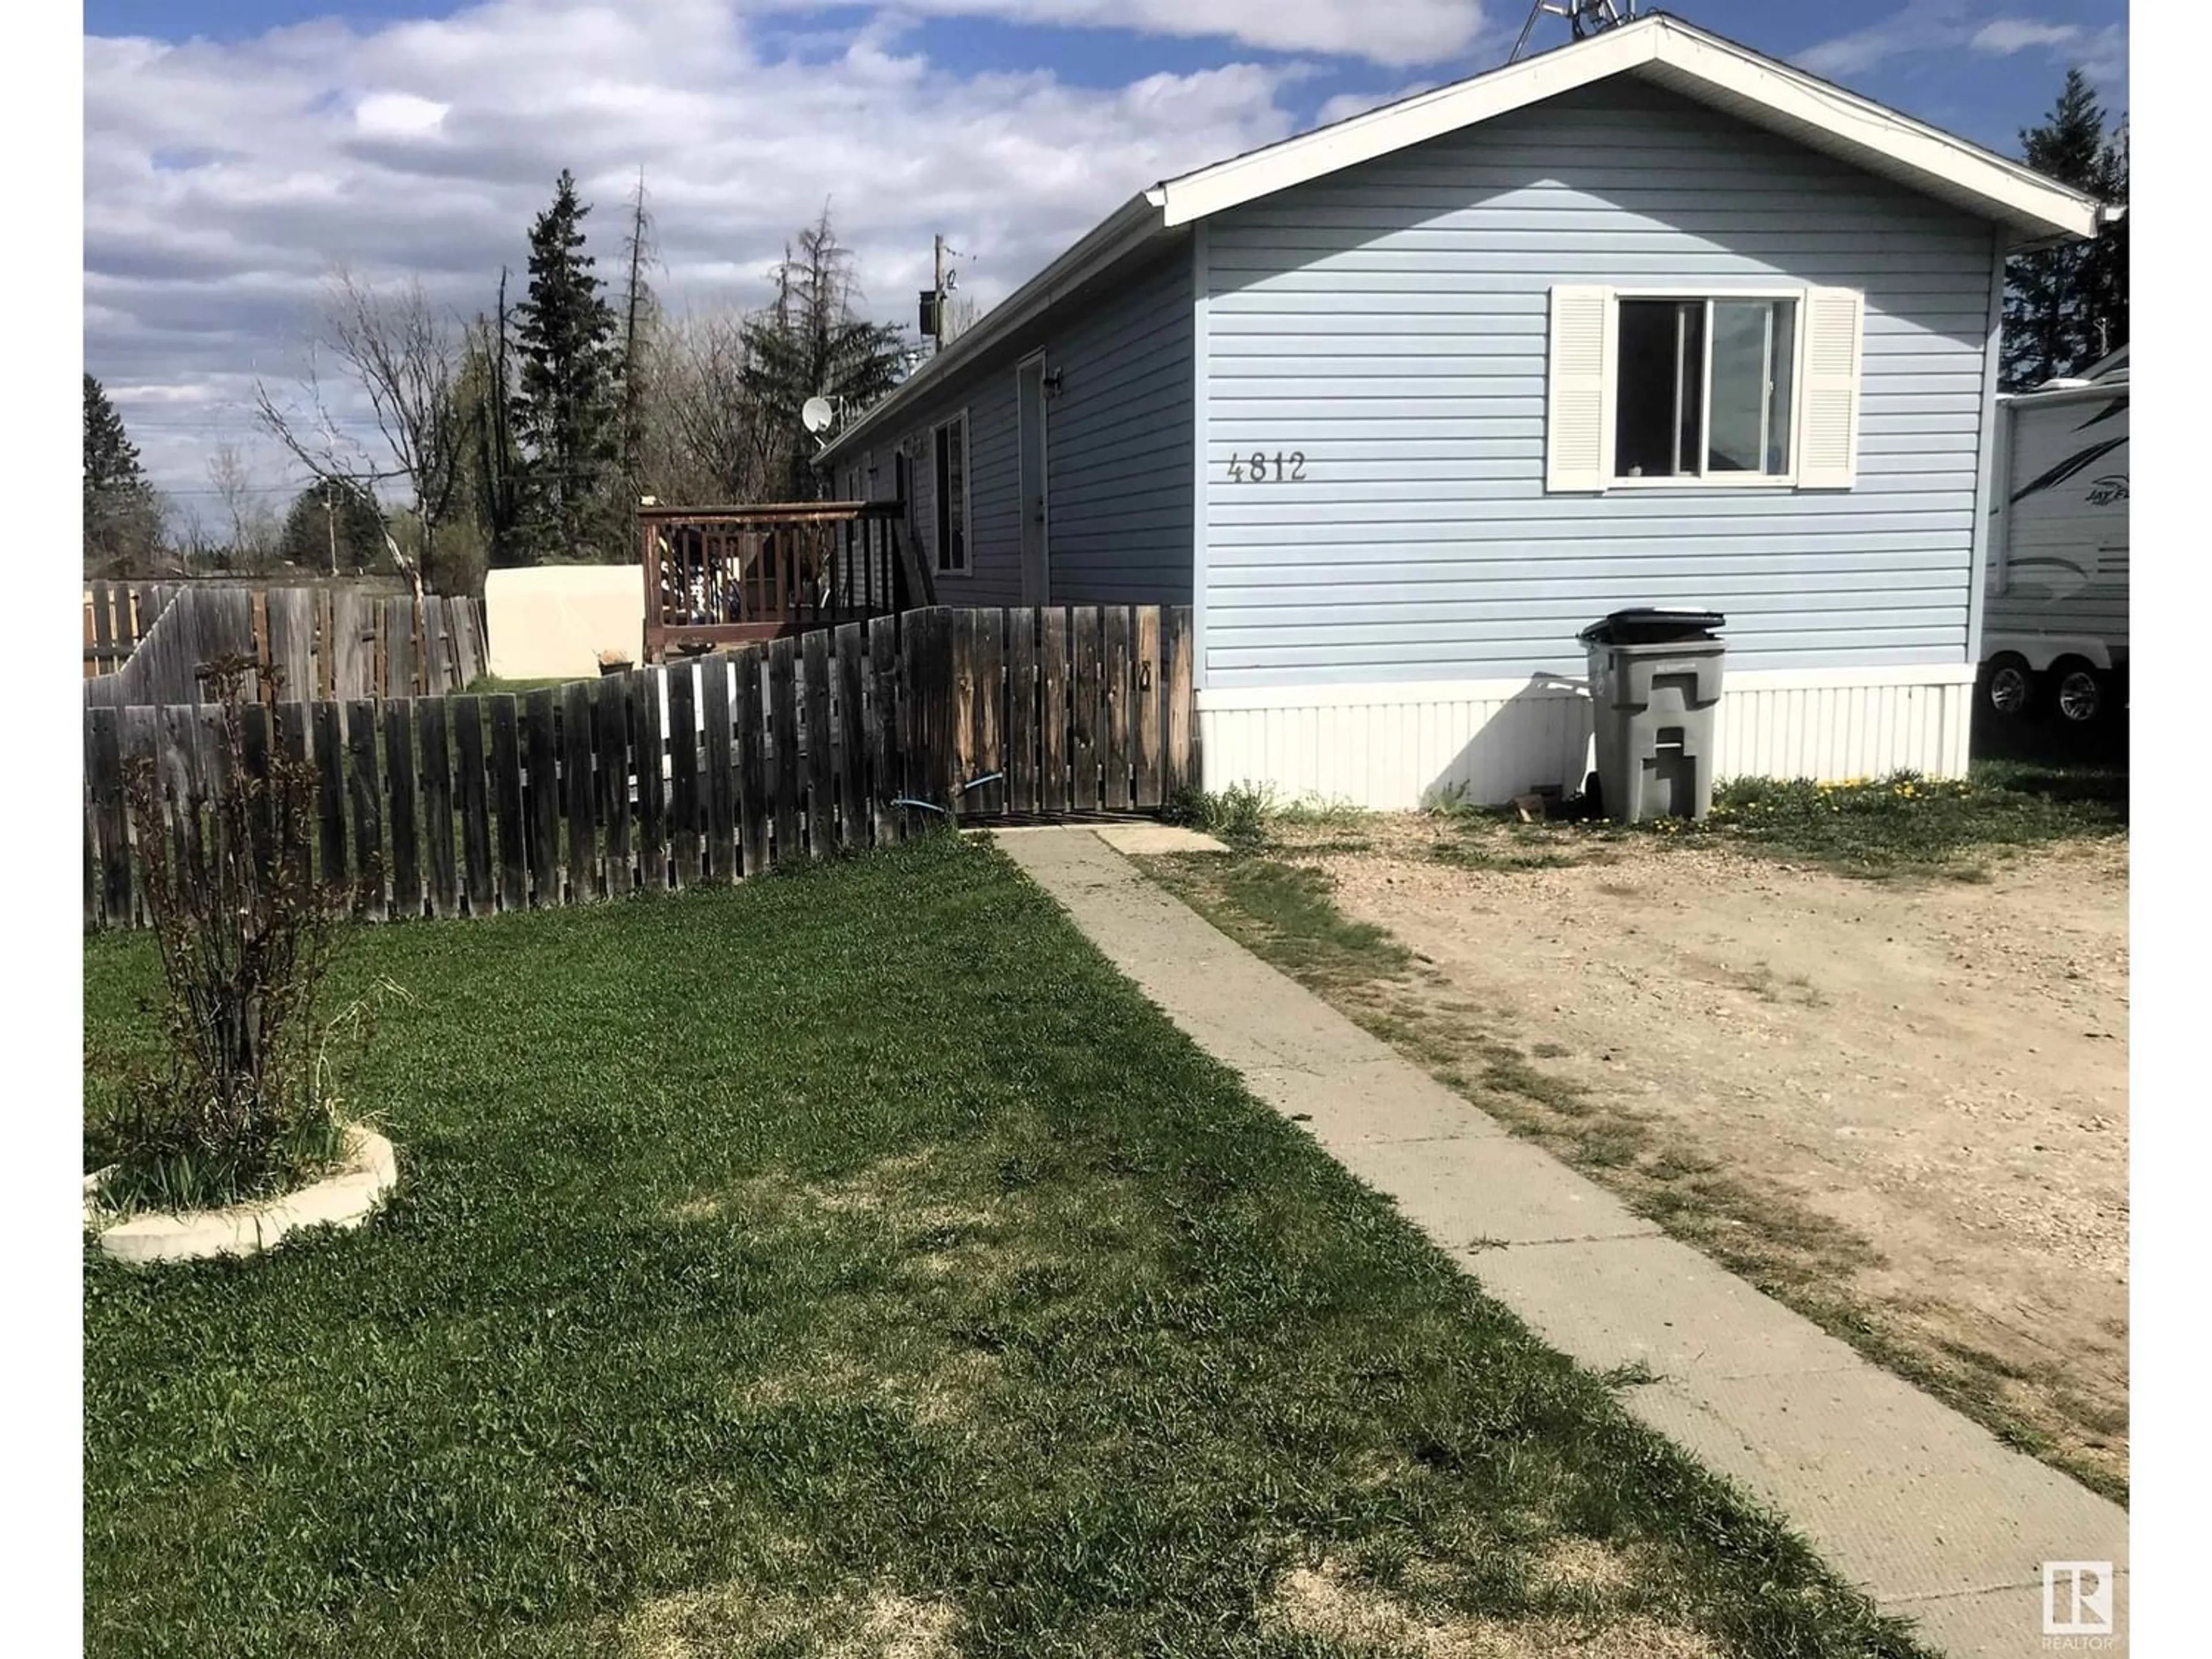 Frontside or backside of a home for 4812 52 Ave, Wildwood Alberta T0E2M0